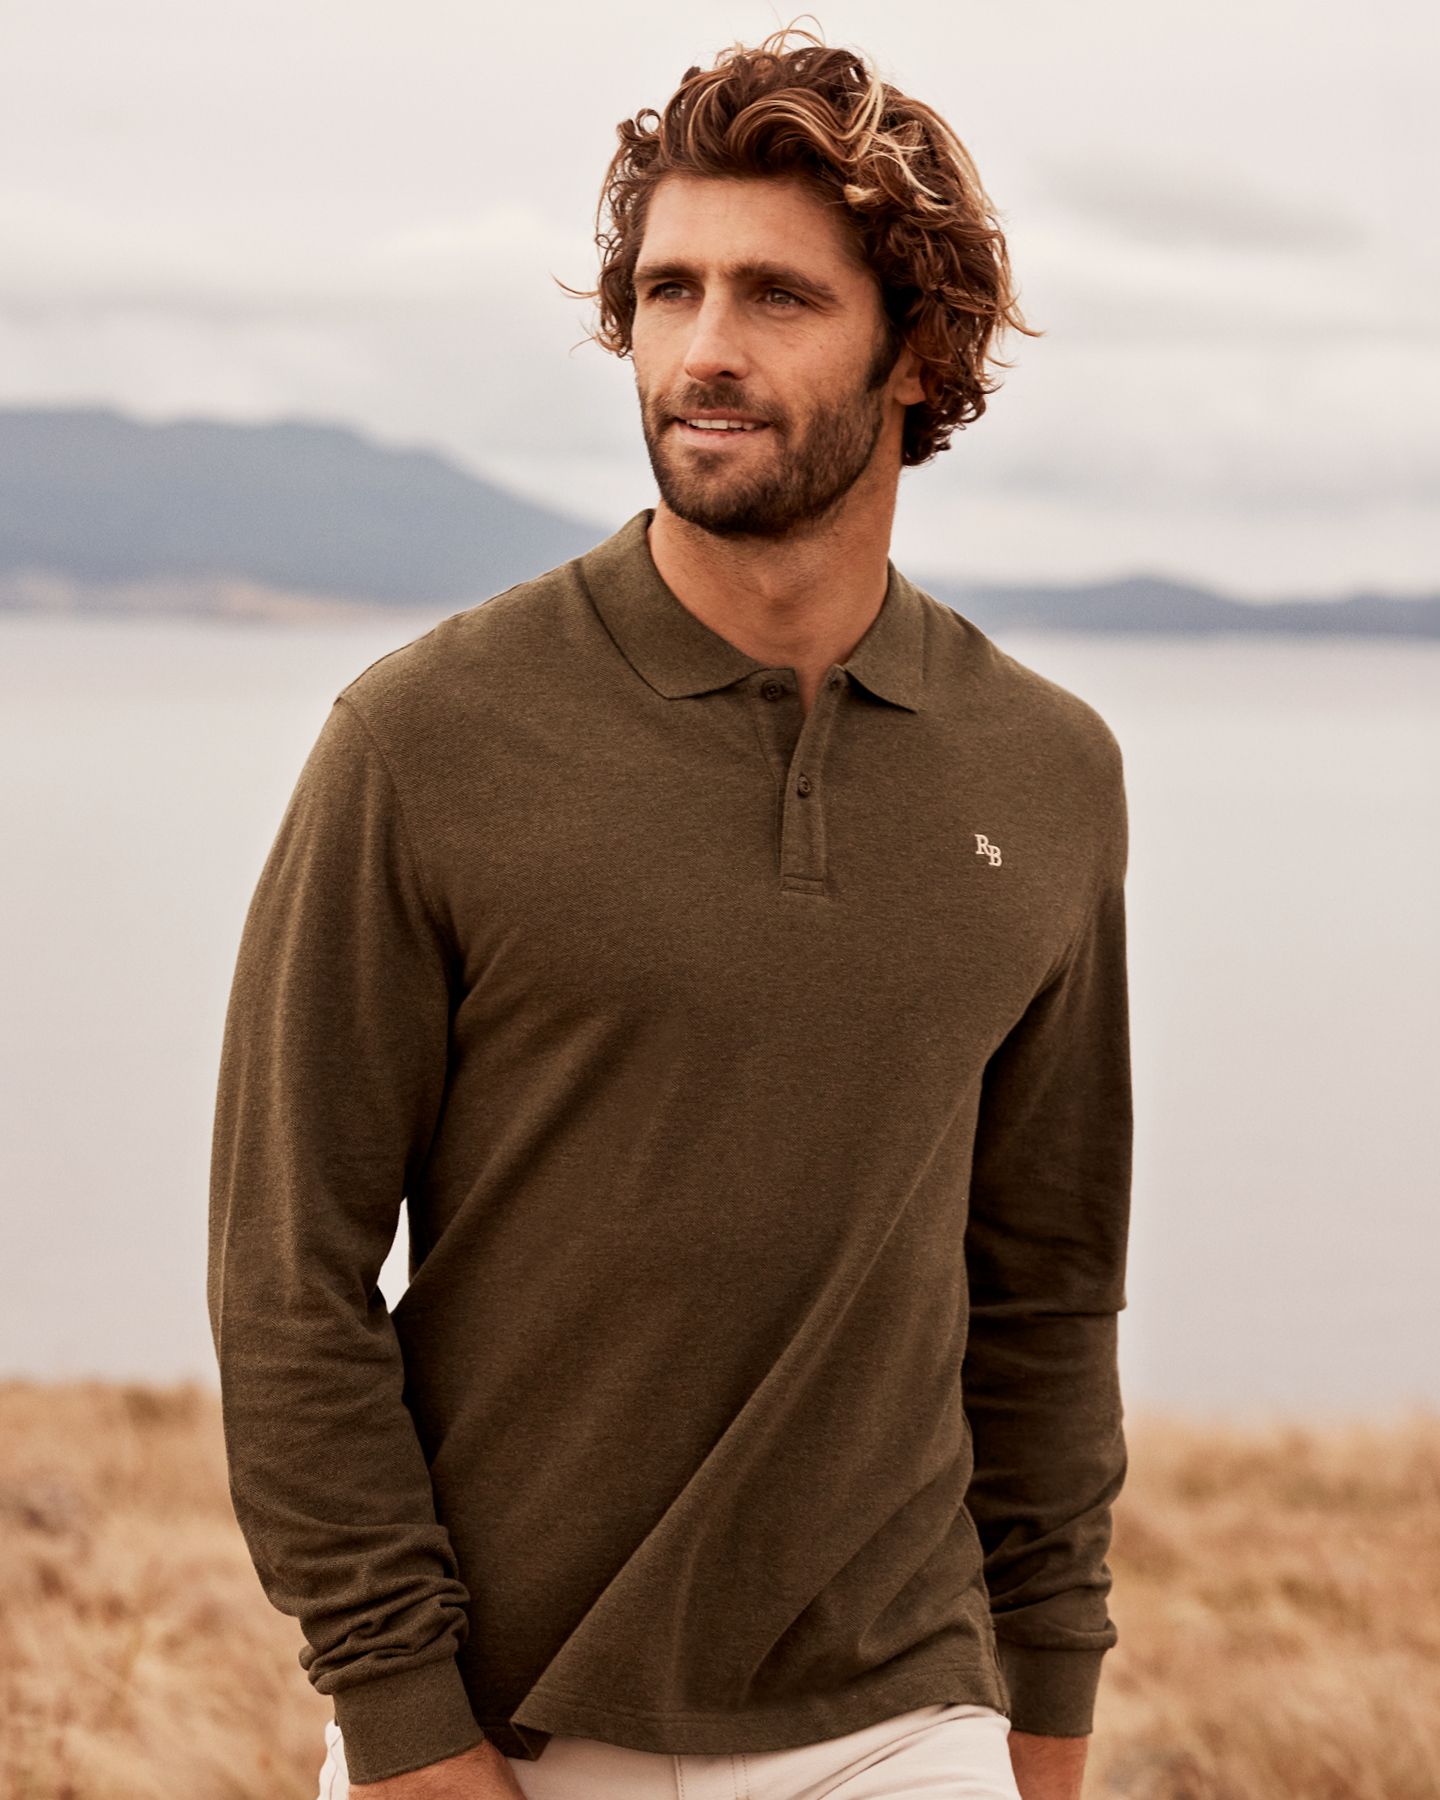 New Arrival | Flinders Long Sleeve Polo

2 for $120 or $69.95 each 

It’s here – your go-to polo with long sl...

Shop via the link in bio. 

#RBSellars